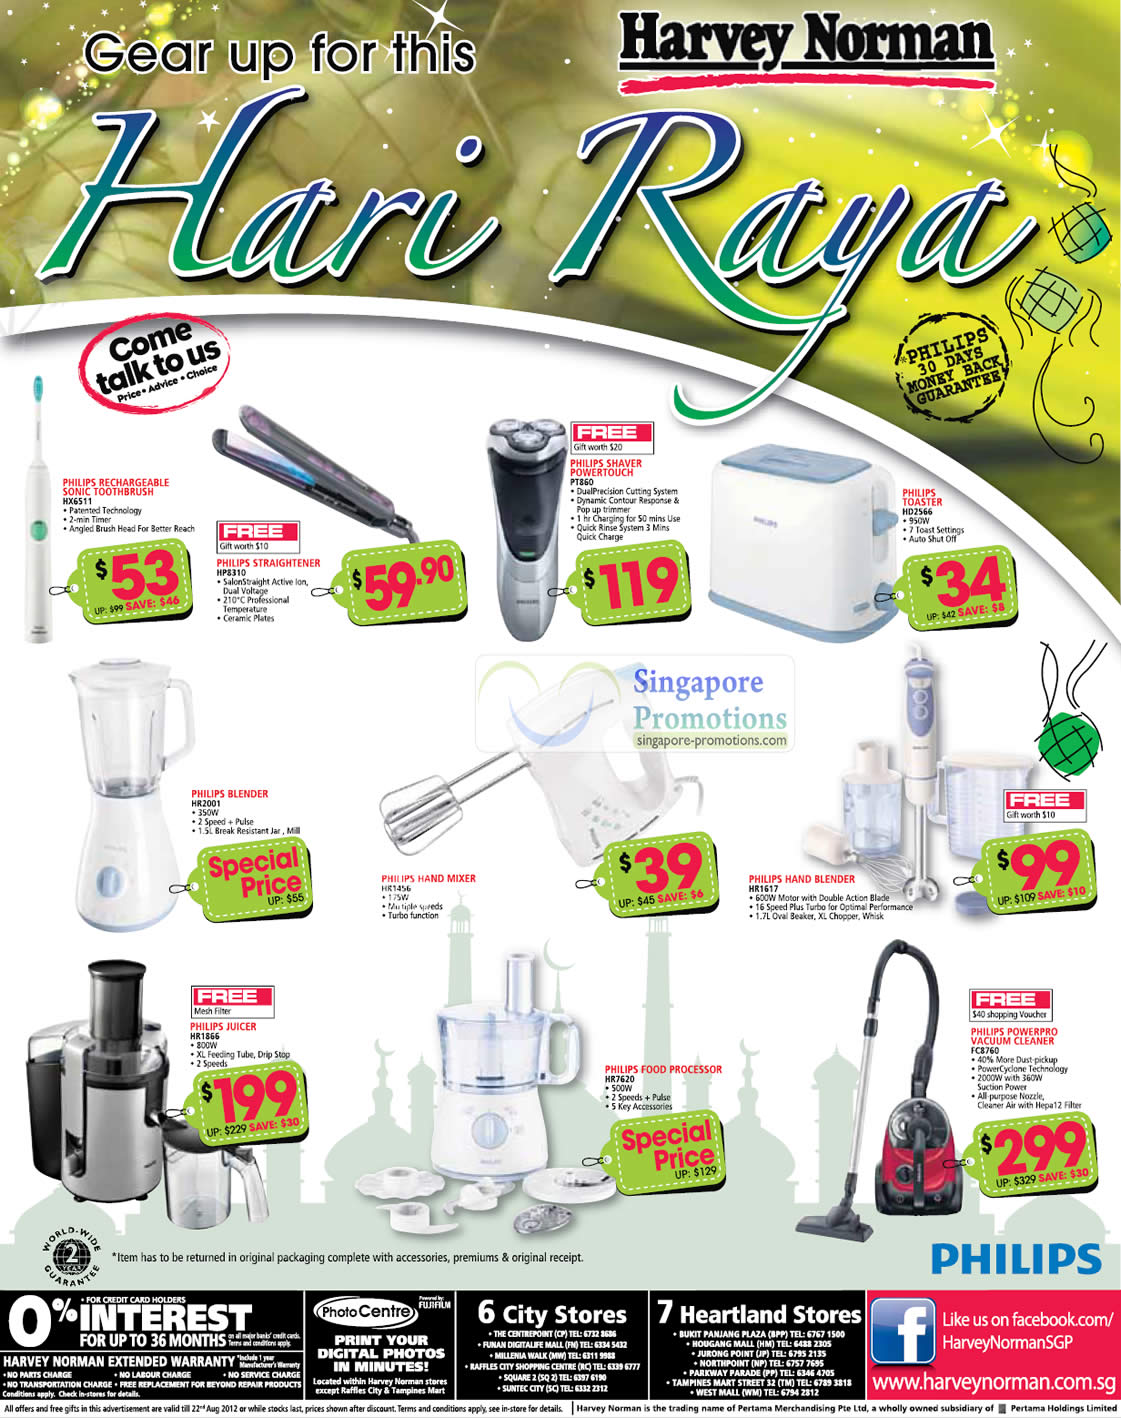 Featured image for Harvey Norman Tips To Maintain Your Kitchen Appliances, Offers & Philips Hari Raya Offers 16 - 22 Aug 2012